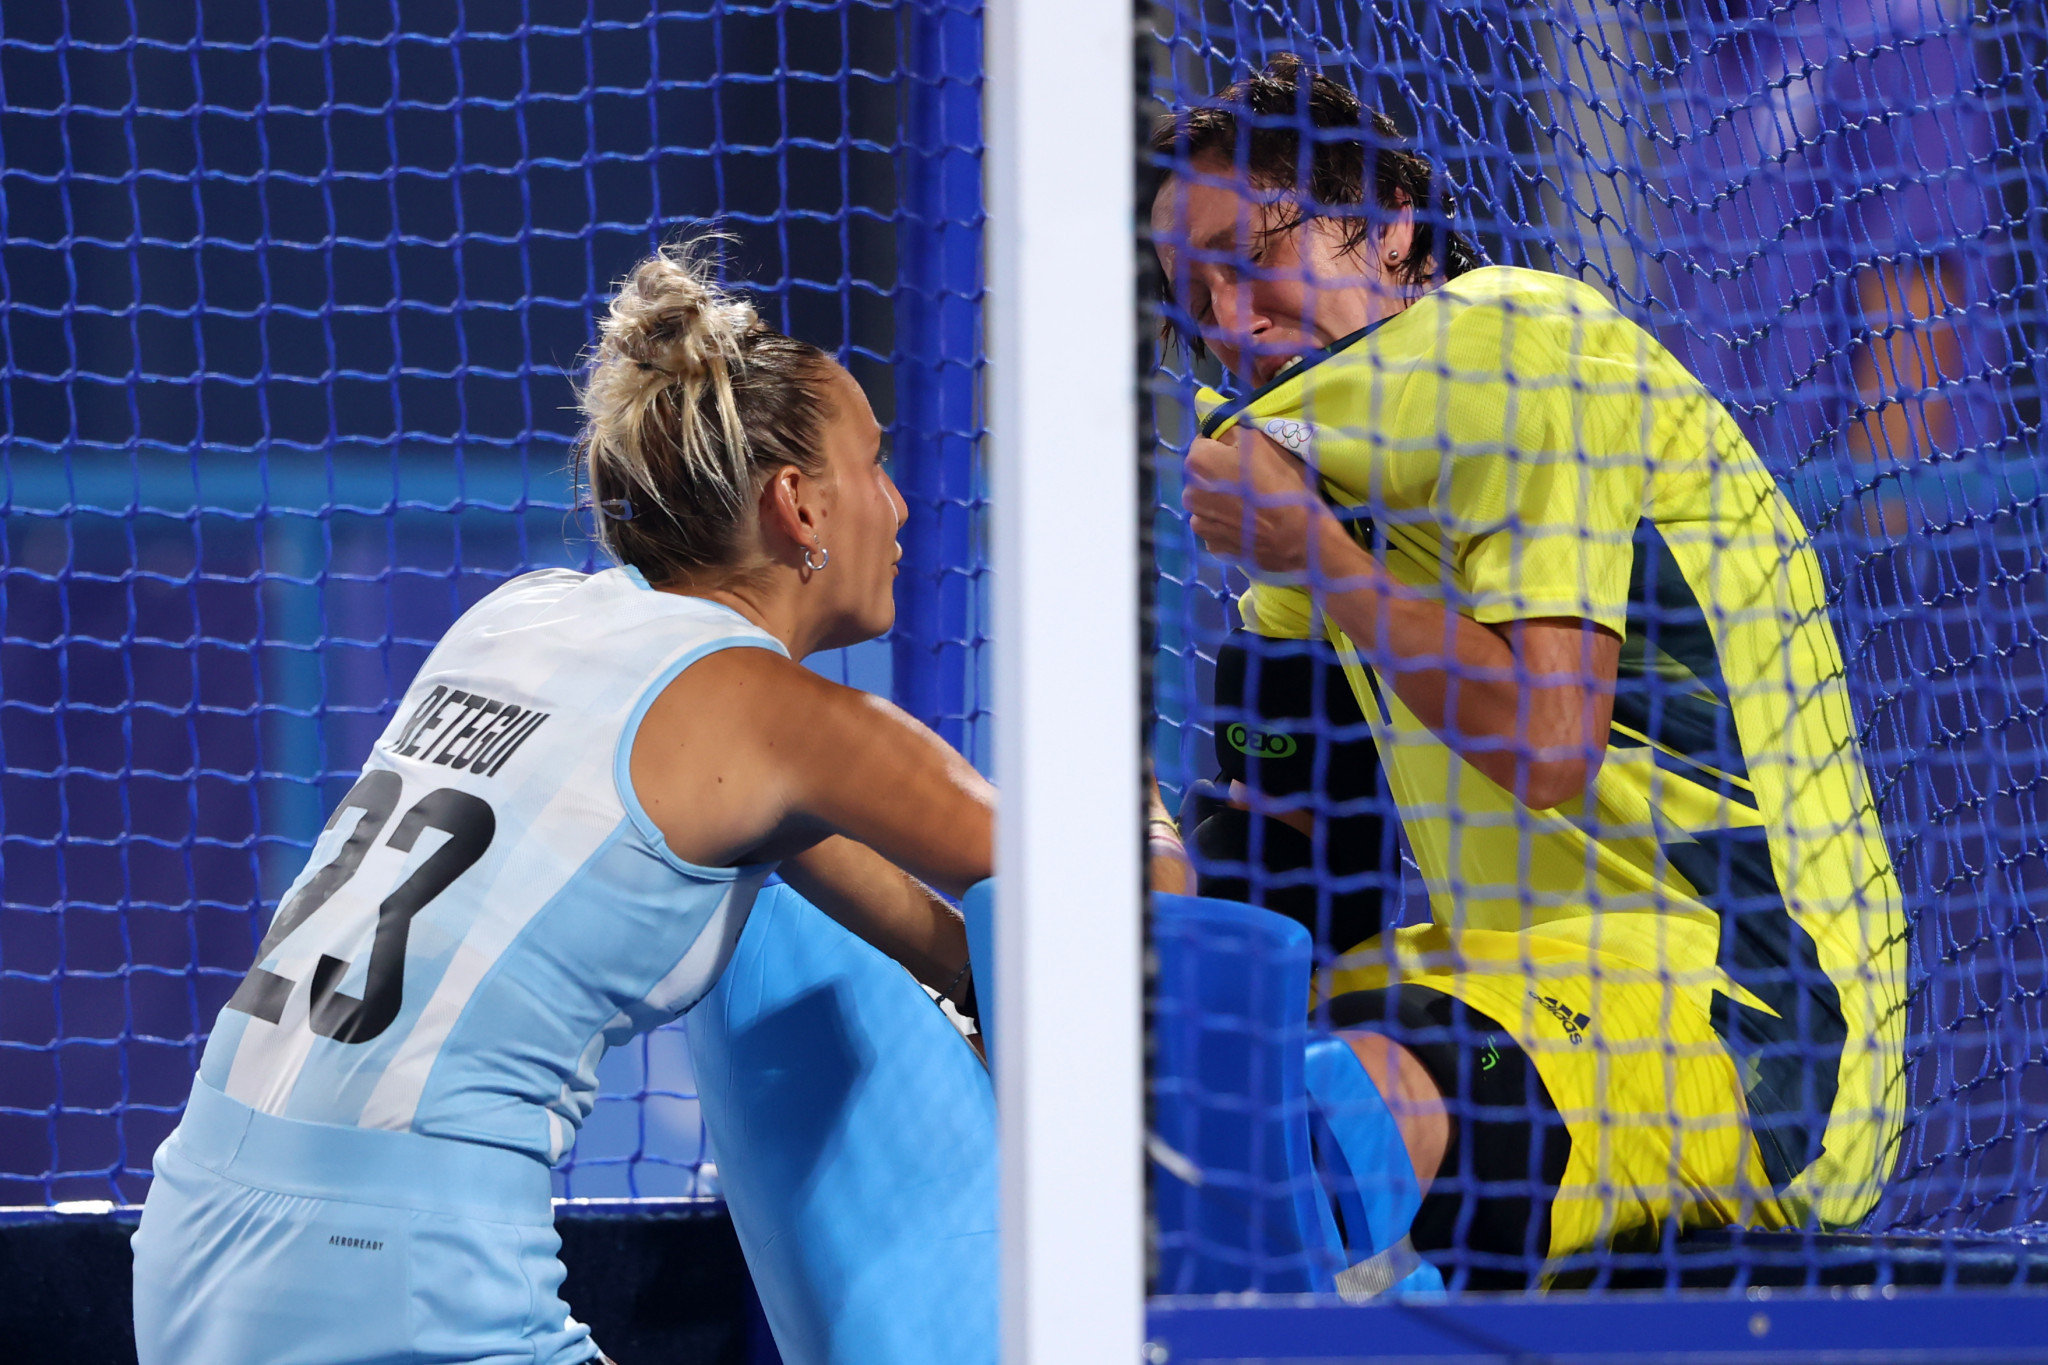 An emotional Argentine goalkeeper Maria Belen Succi is consoled after her country loses the women's hockey gold medal match on penalties ©Getty Images